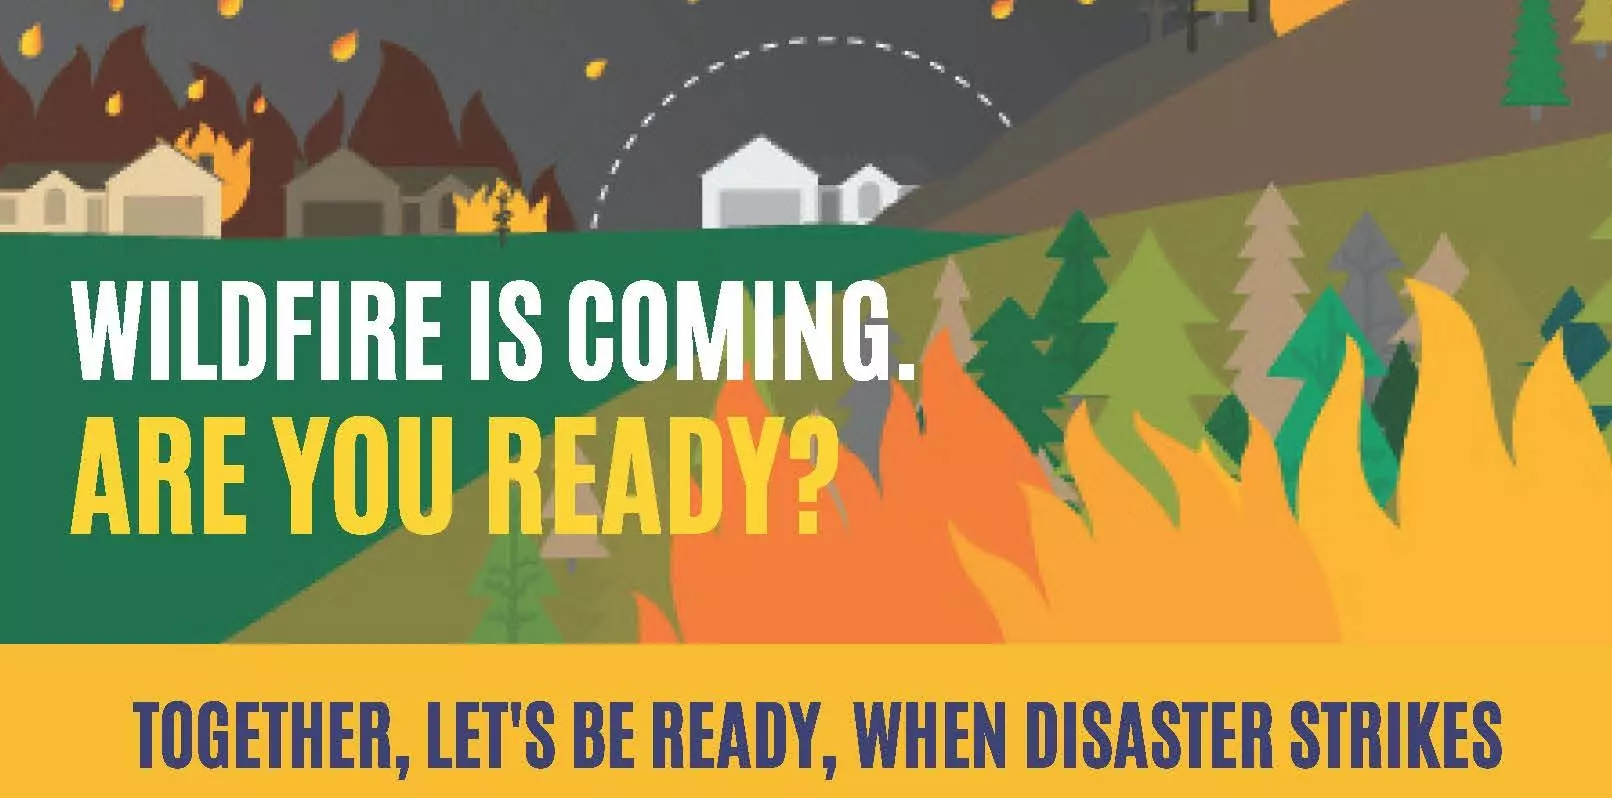 Image of Wildfire with the text: Wildfire is Coming. Are You Ready? Together, Let's be Ready, When Disaster Strikes